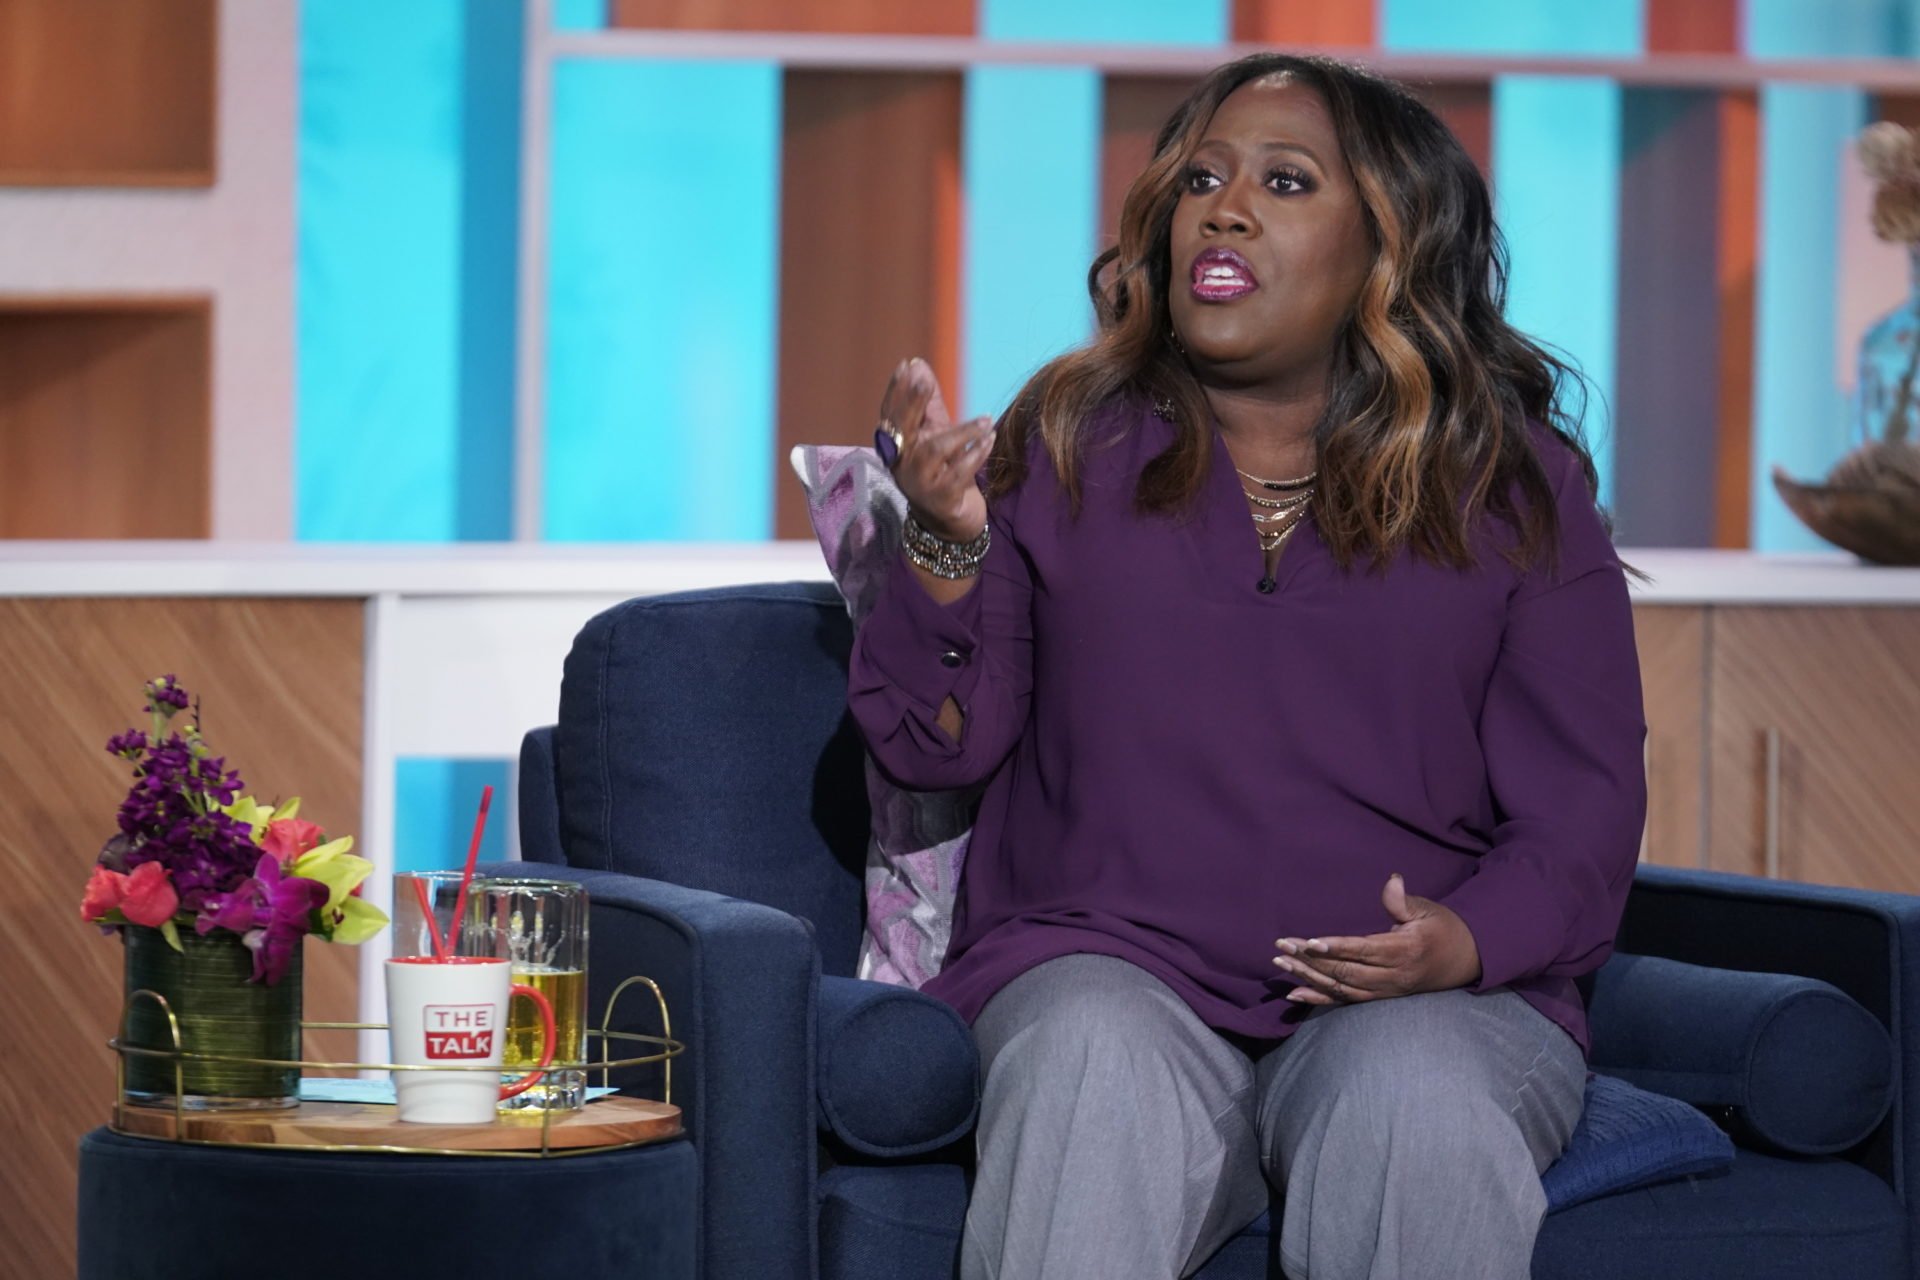 Sheryl Underwood's 'amazing' weight loss transformation isn't down to surgery